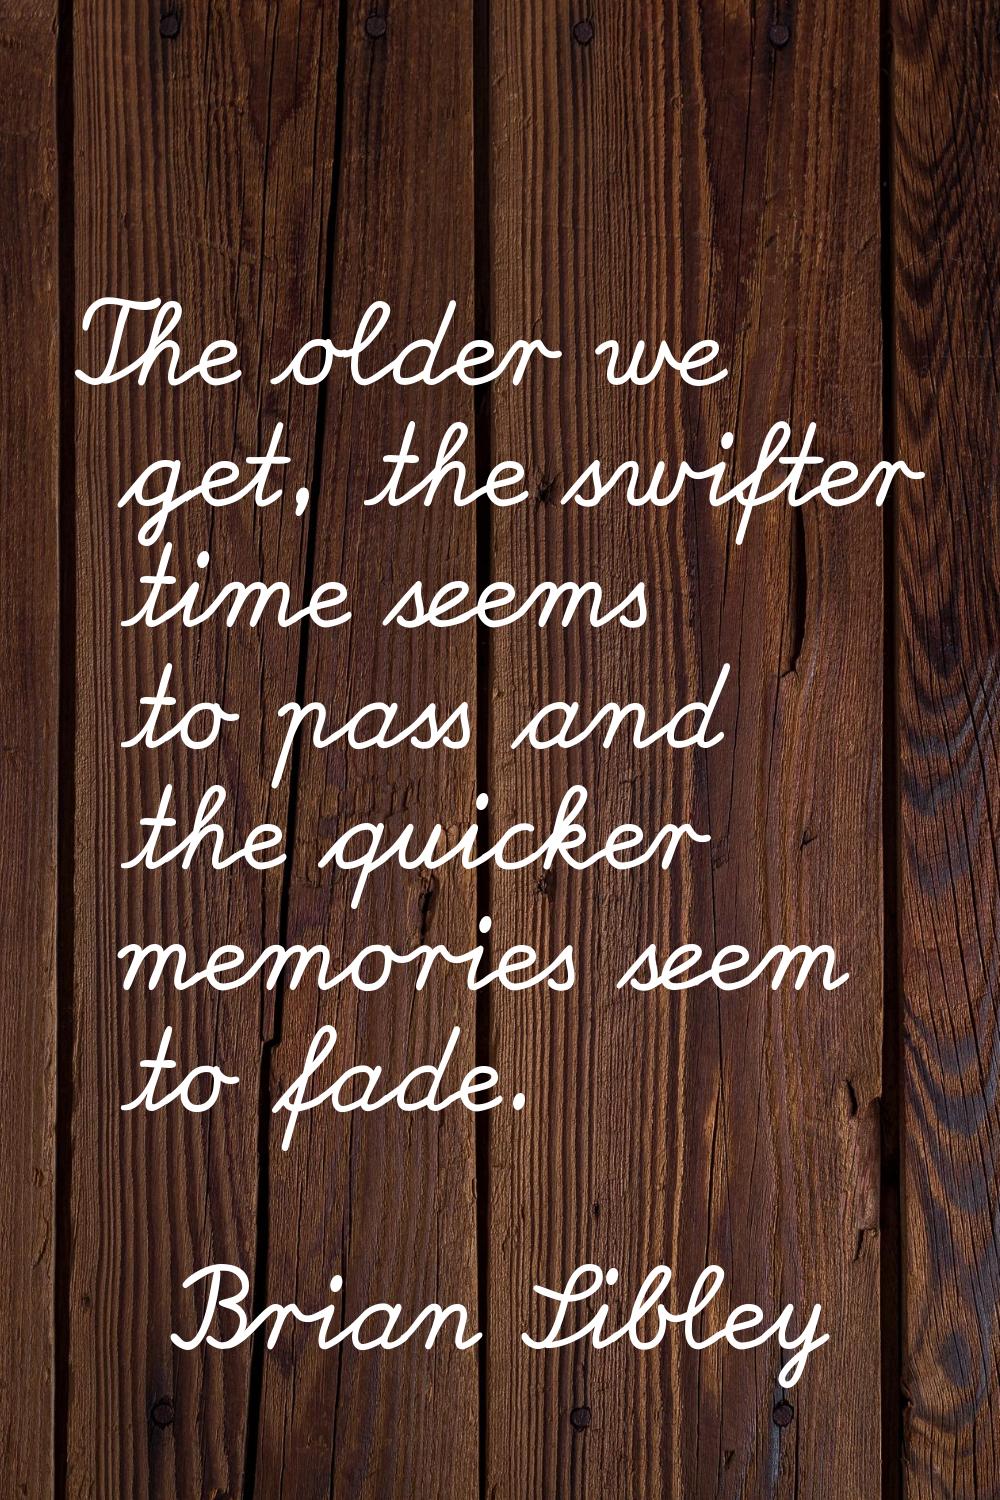 The older we get, the swifter time seems to pass and the quicker memories seem to fade.